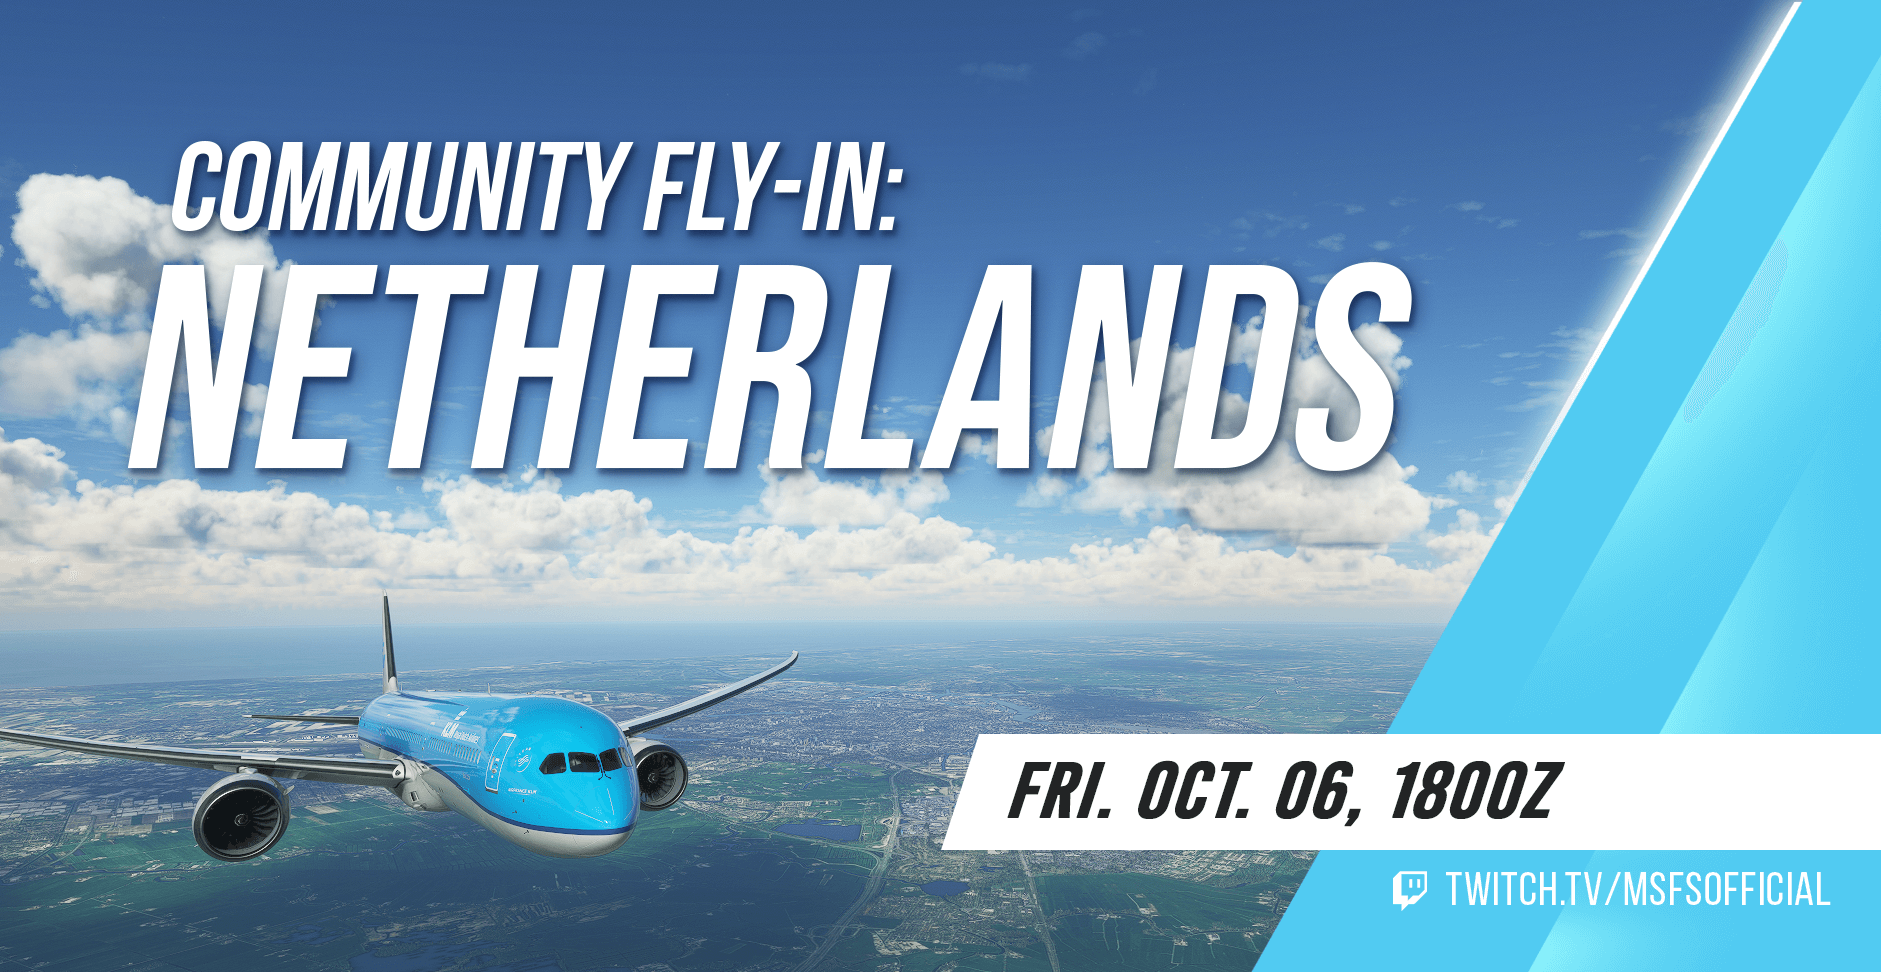 A Boeing 787 with KLM livery flies above Amsterdam. Community Fly-In: Netherlands. Join us on Friday, October 6th at 1800Z. We'll be streaming at twitch.tv/msfsofficial.